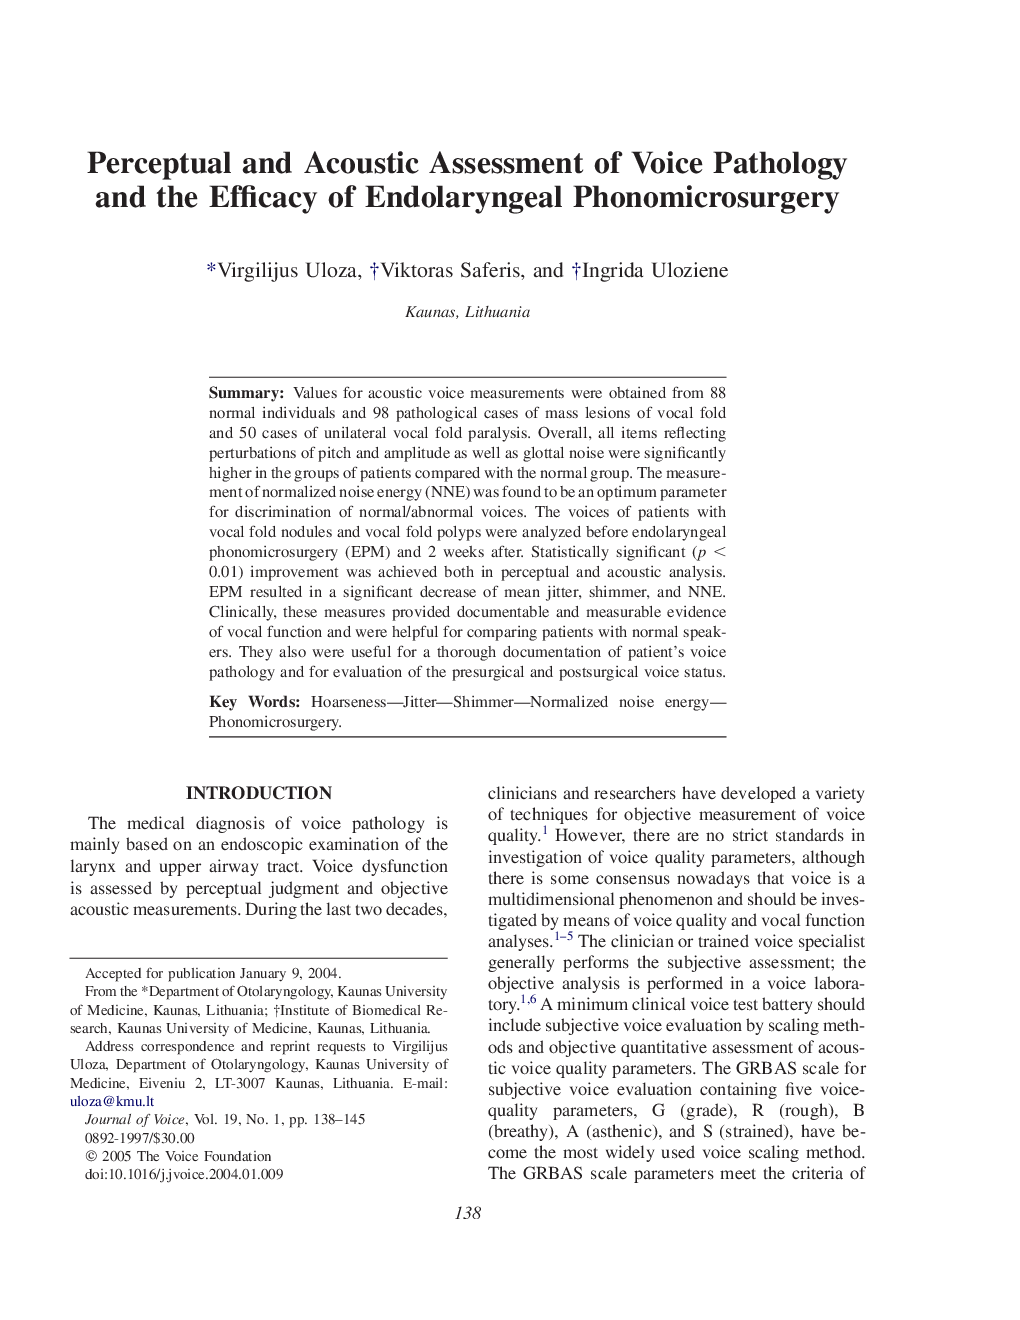 Perceptual and Acoustic Assessment of Voice Pathology and the Efficacy of Endolaryngeal Phonomicrosurgery